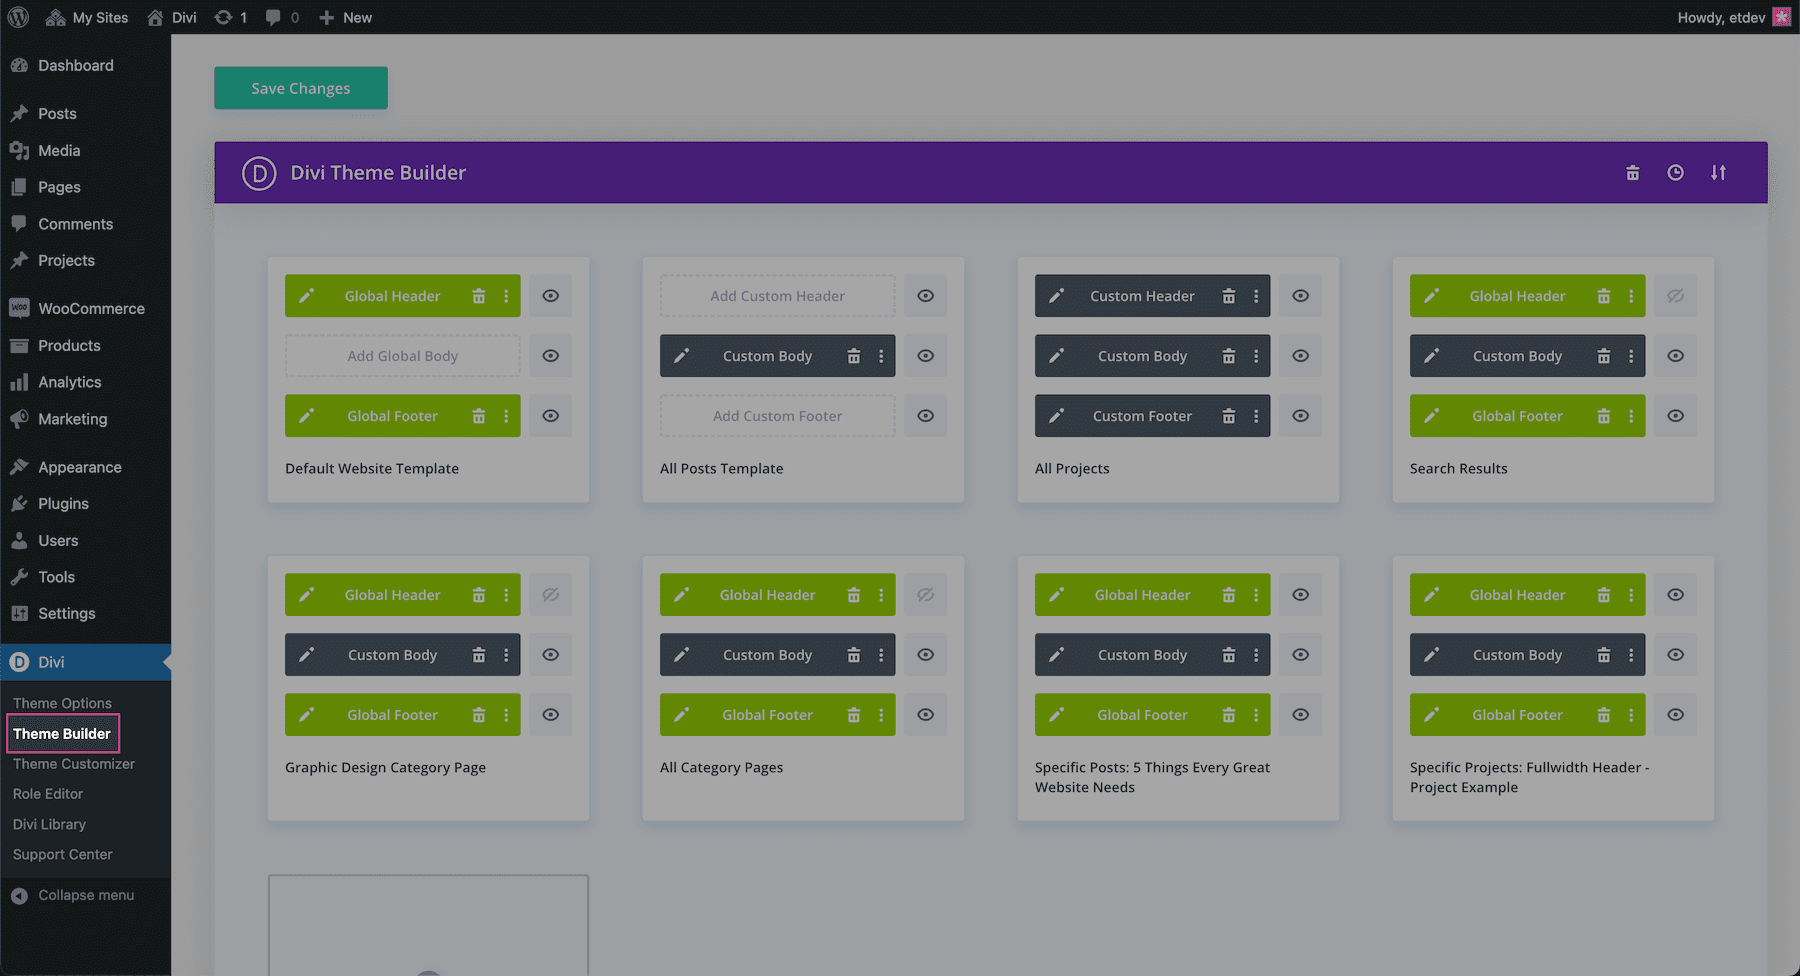 Navigate to the Theme Builder